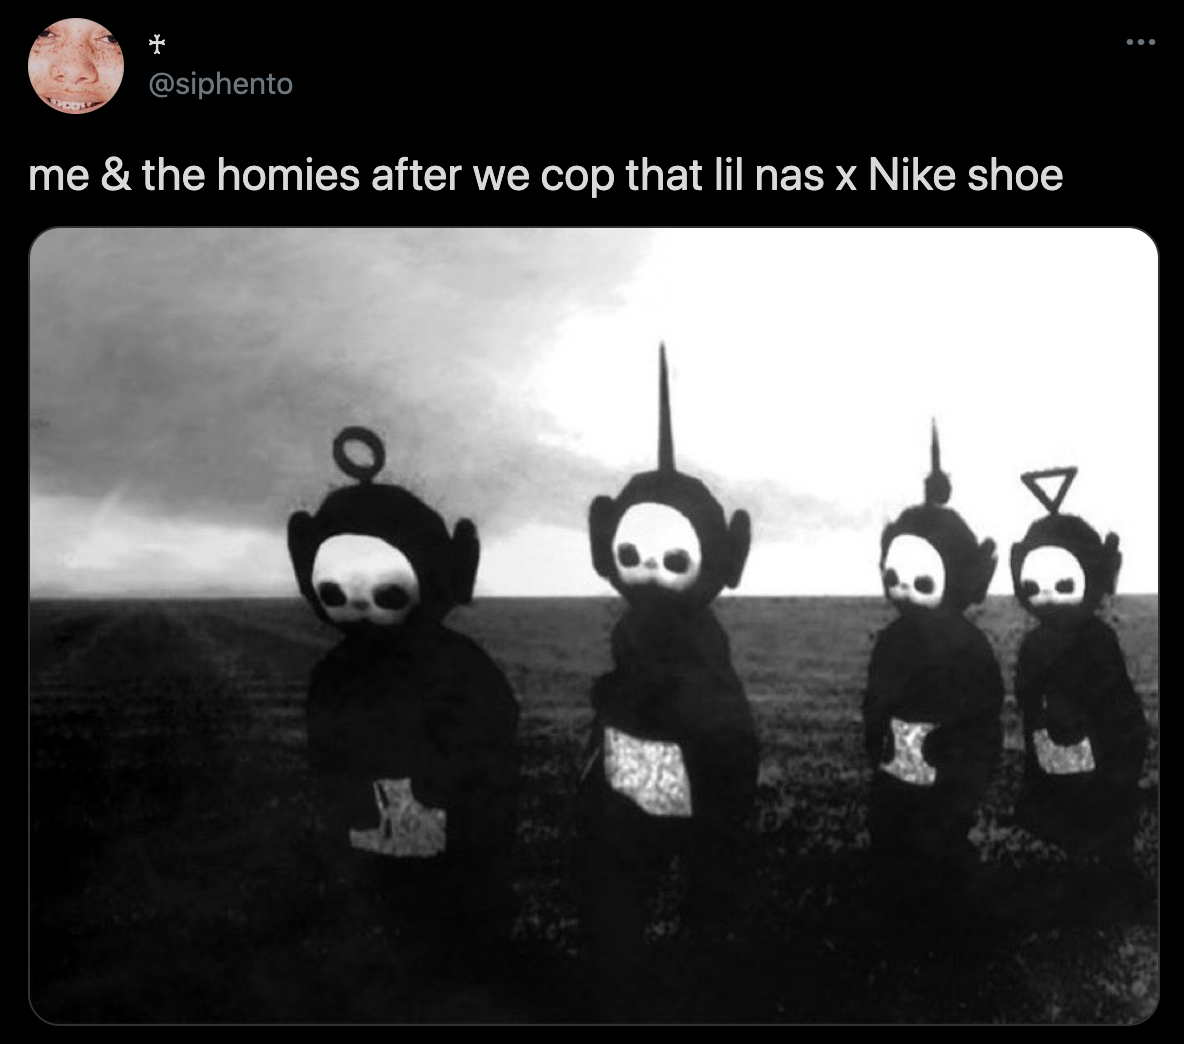 lil nas x nike satan shoes - teletubbies black and white - me & the homies after we cop that lil nas x Nike shoe